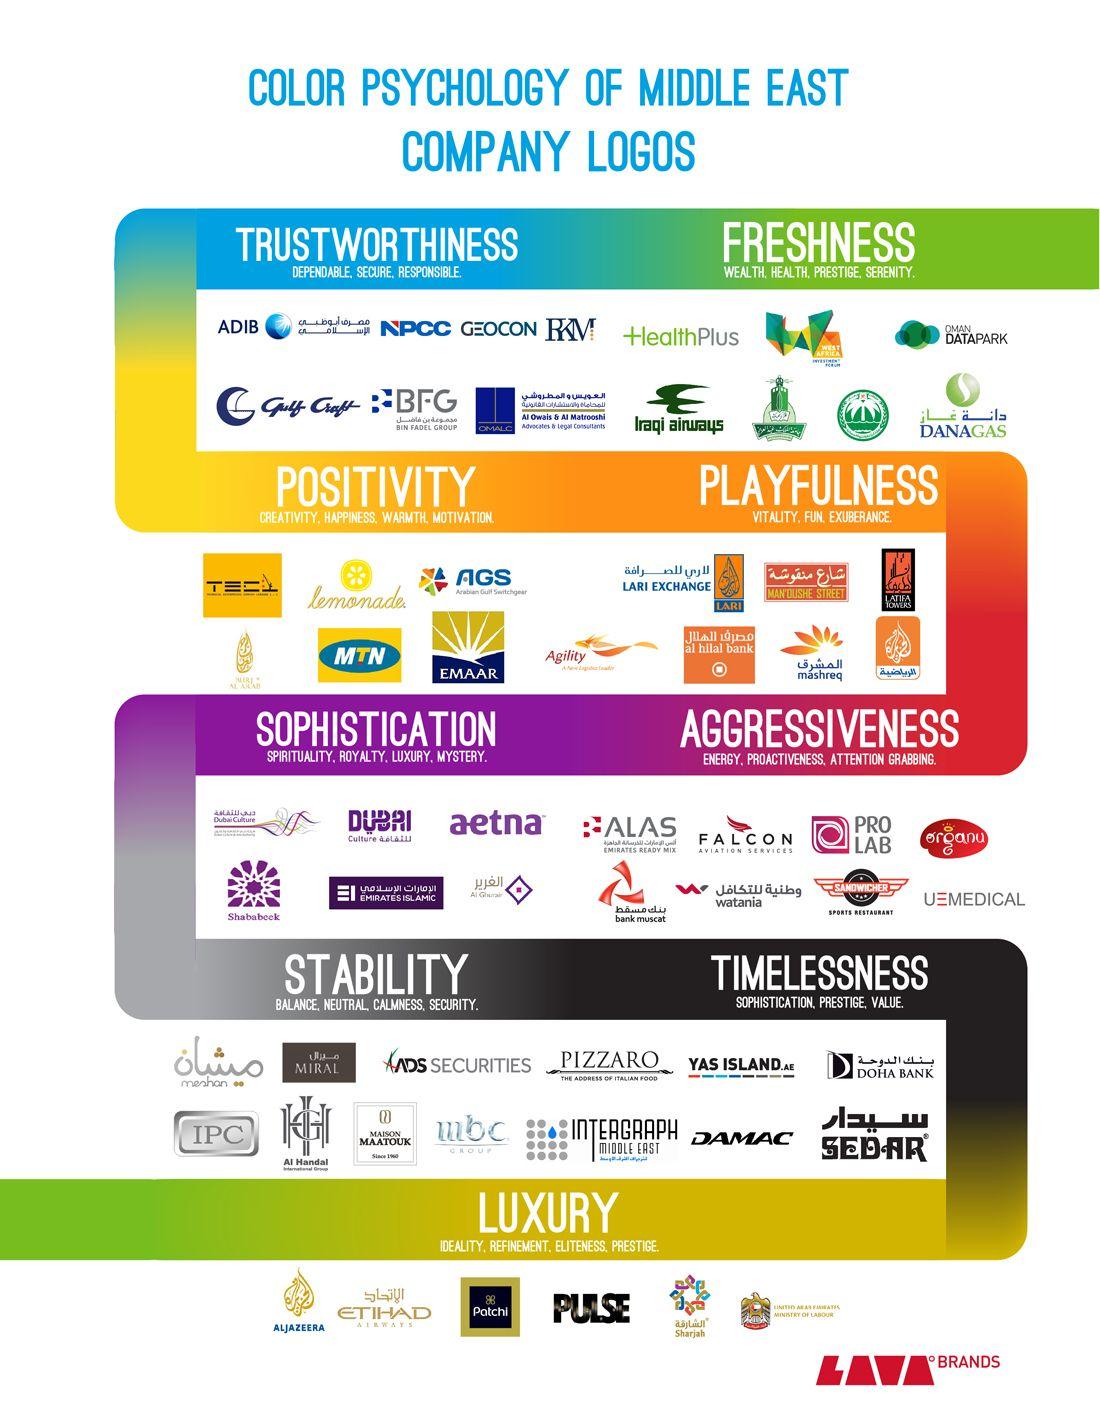 Color Company Logo - COLOR PSYCHOLOGY OF MIDDLE EAST COMPANY LOGOS [Infographic] | Visual.ly